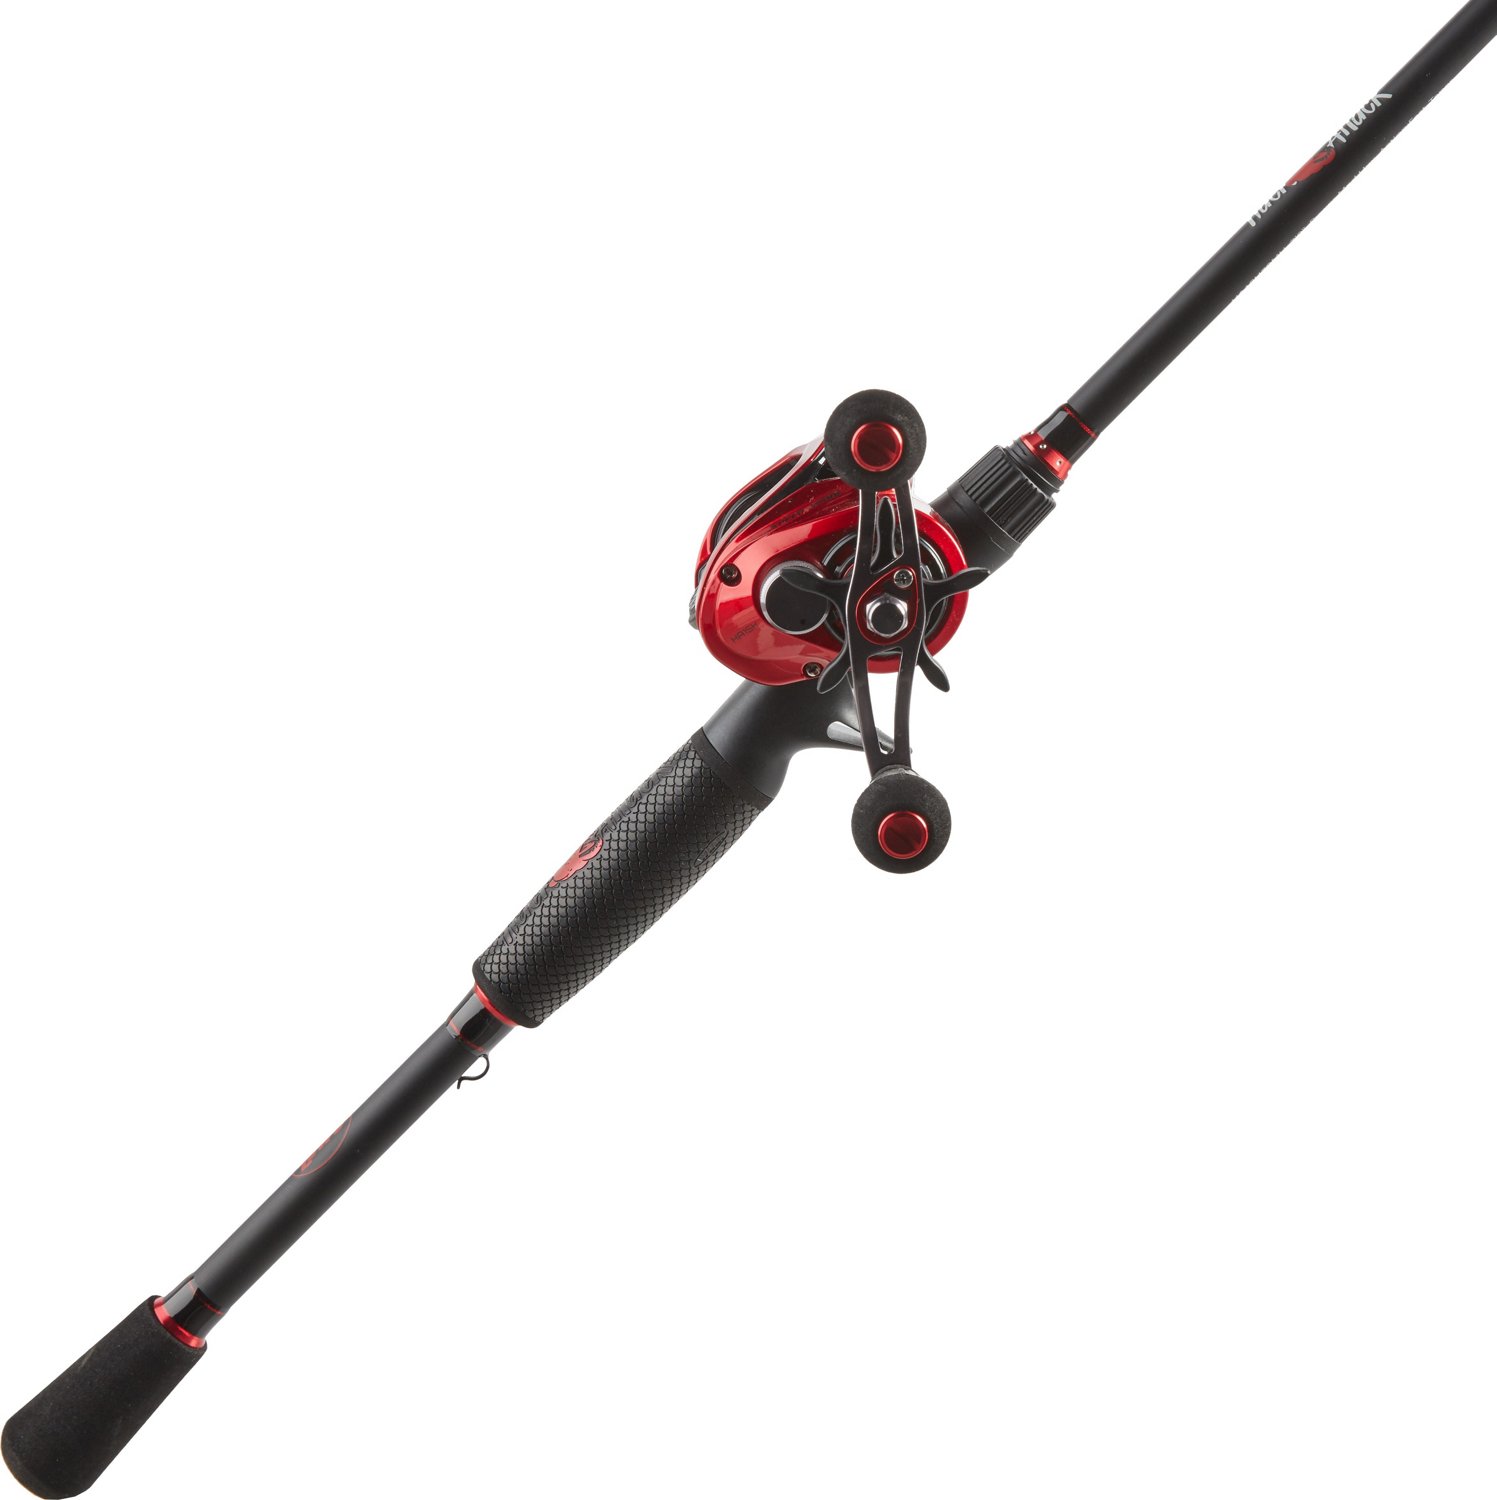 All-New + All Yours, Get the latest Lew's Hack Attack rods, reels + combos  for your best catches ever - available only at Academy., By Academy Sports  + Outdoors